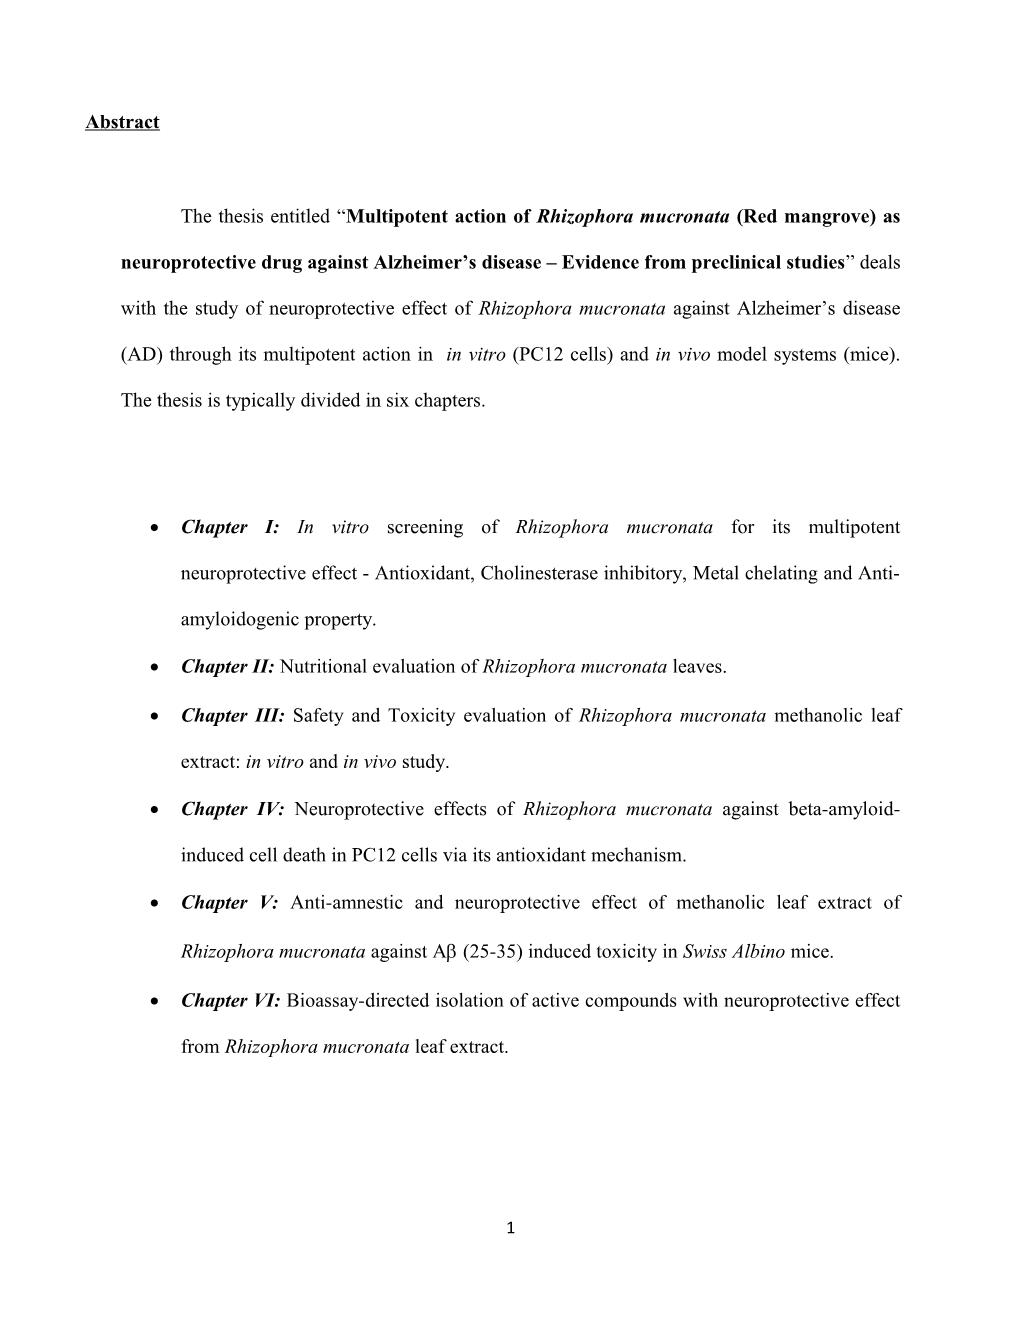 The Thesis Entitled Multipotent Action of Rhizophora Mucronata (Red Mangrove) As Neuroprotective